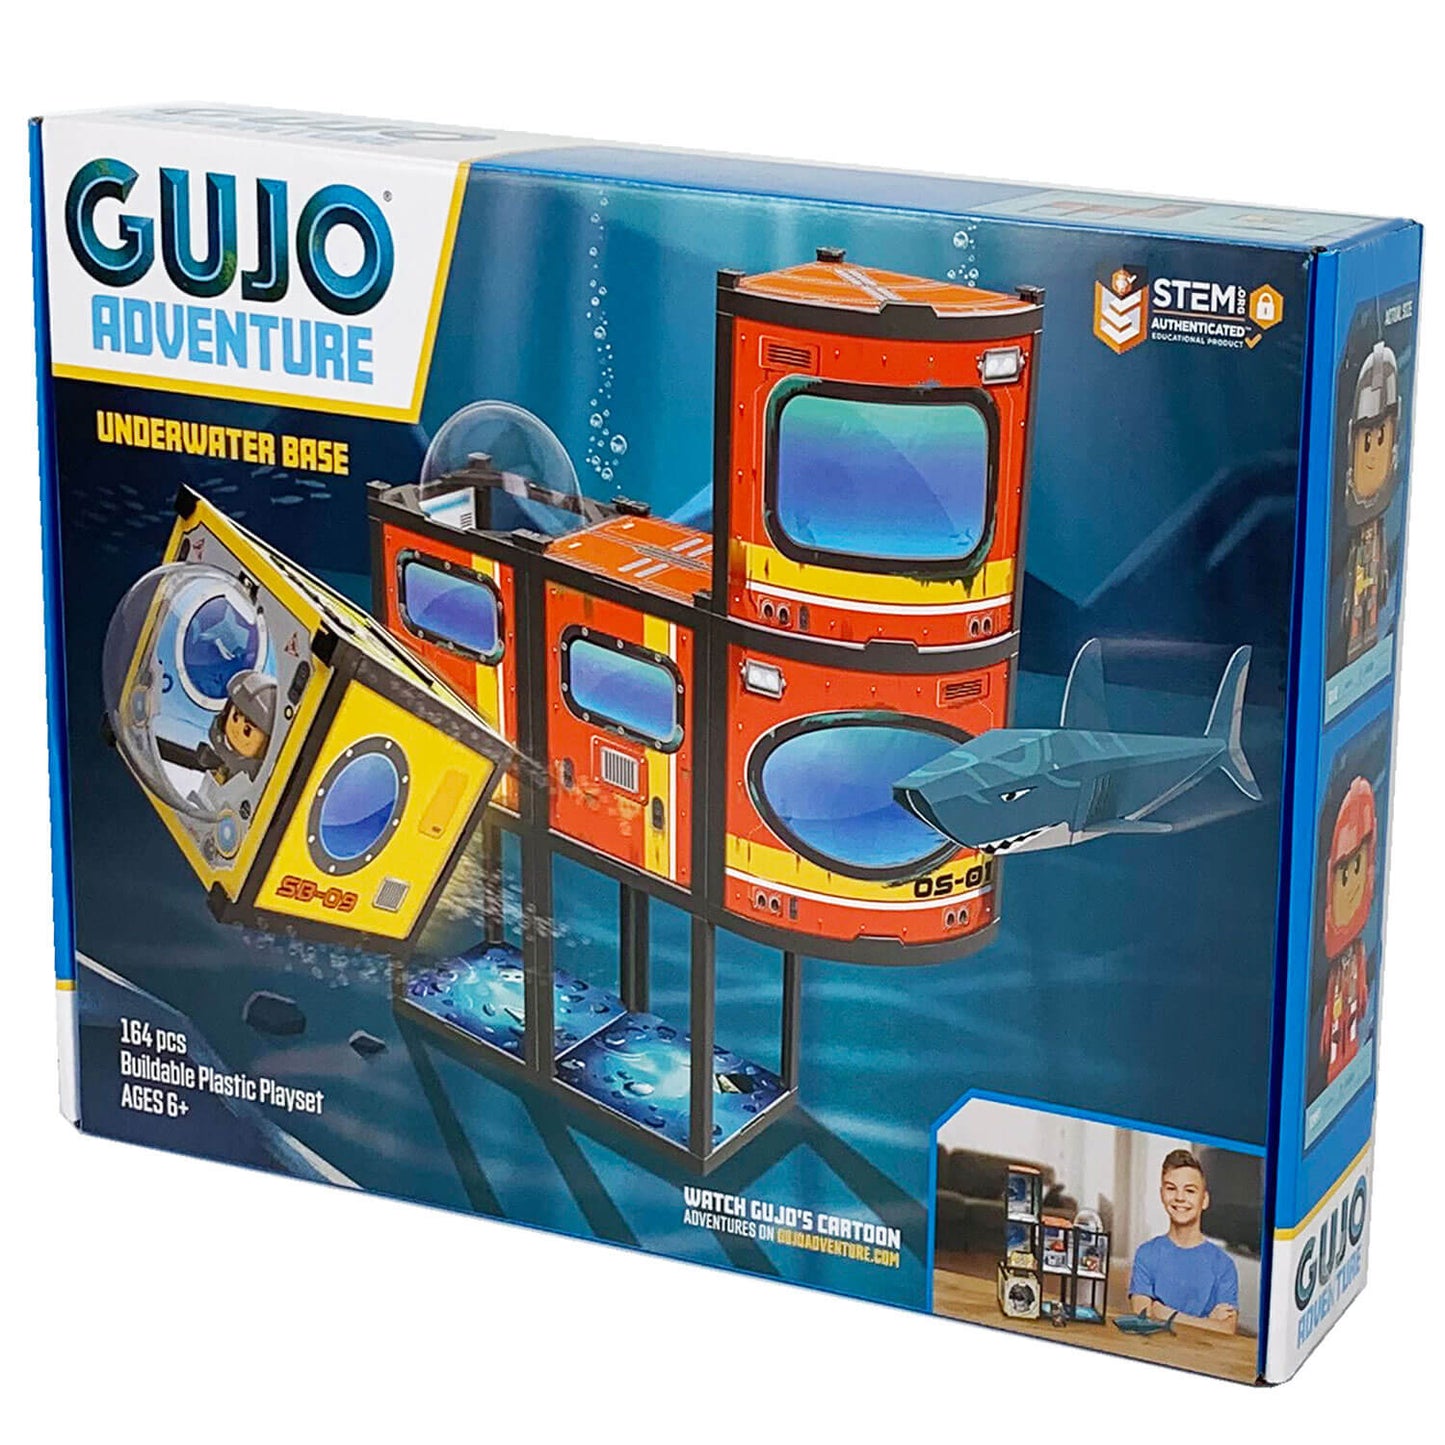 Gujo Adventure Underwater Base STEM authenticated building set for ages 6+